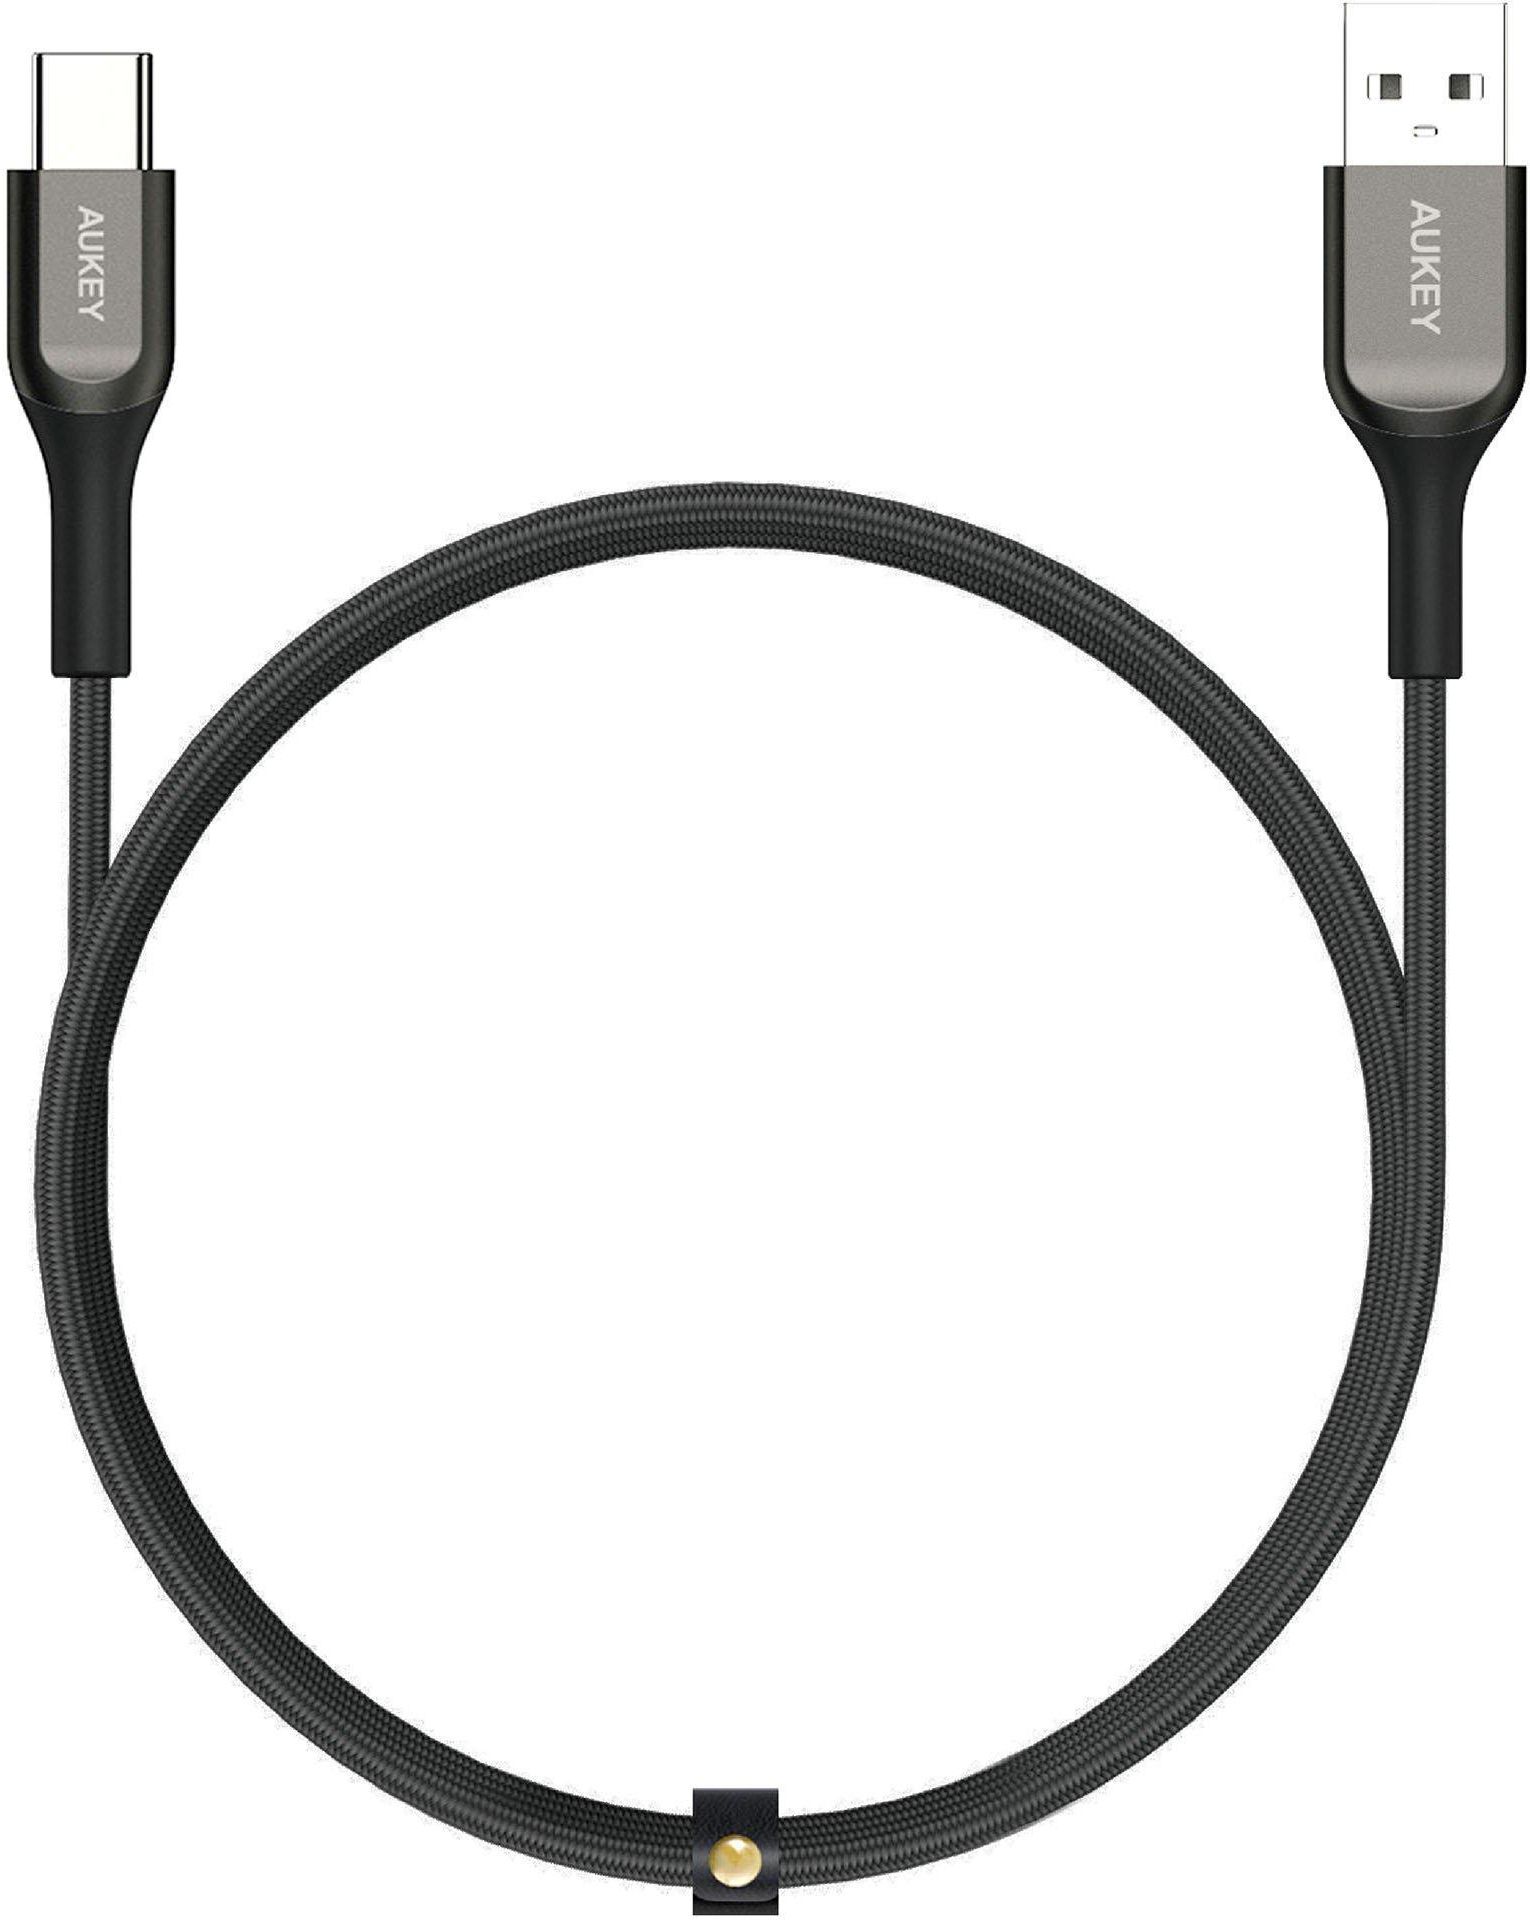 AUKEY USB-A To C Cable 2M, Black